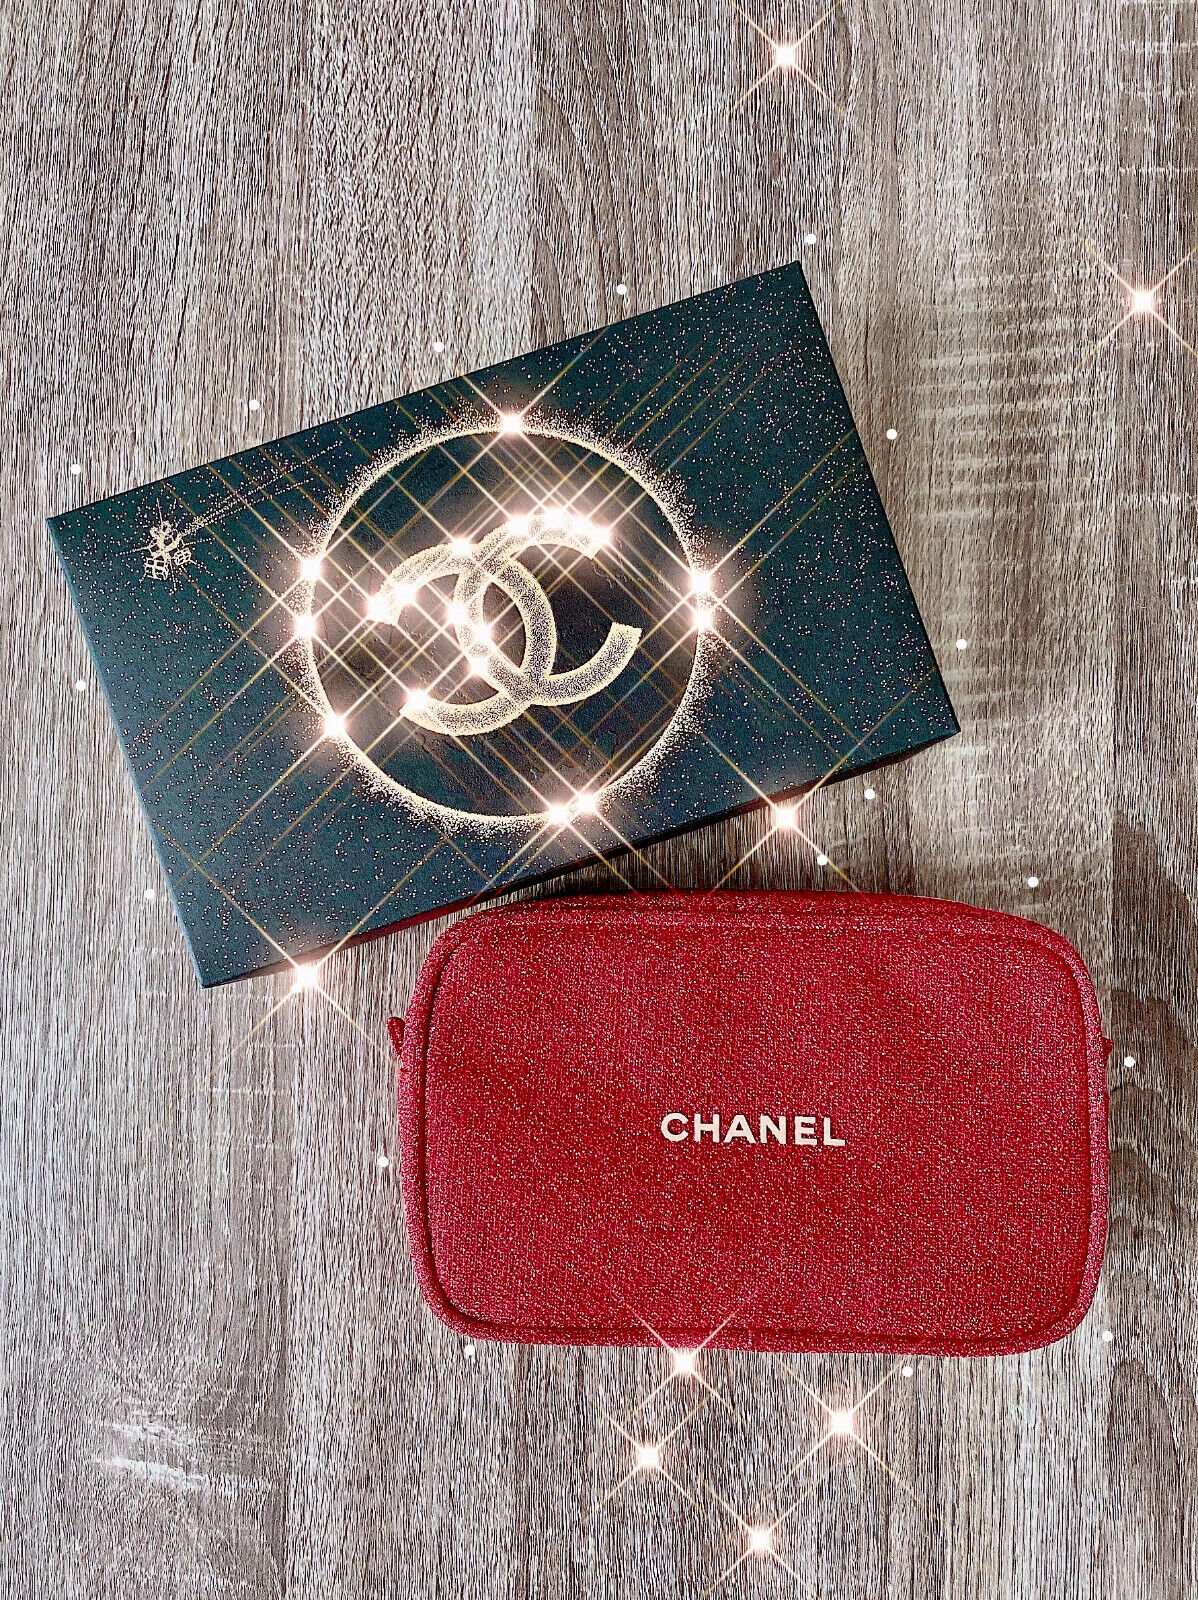 BNIB CHANEL 2020 Limited Edition Holiday Beauty Gift Set Good to